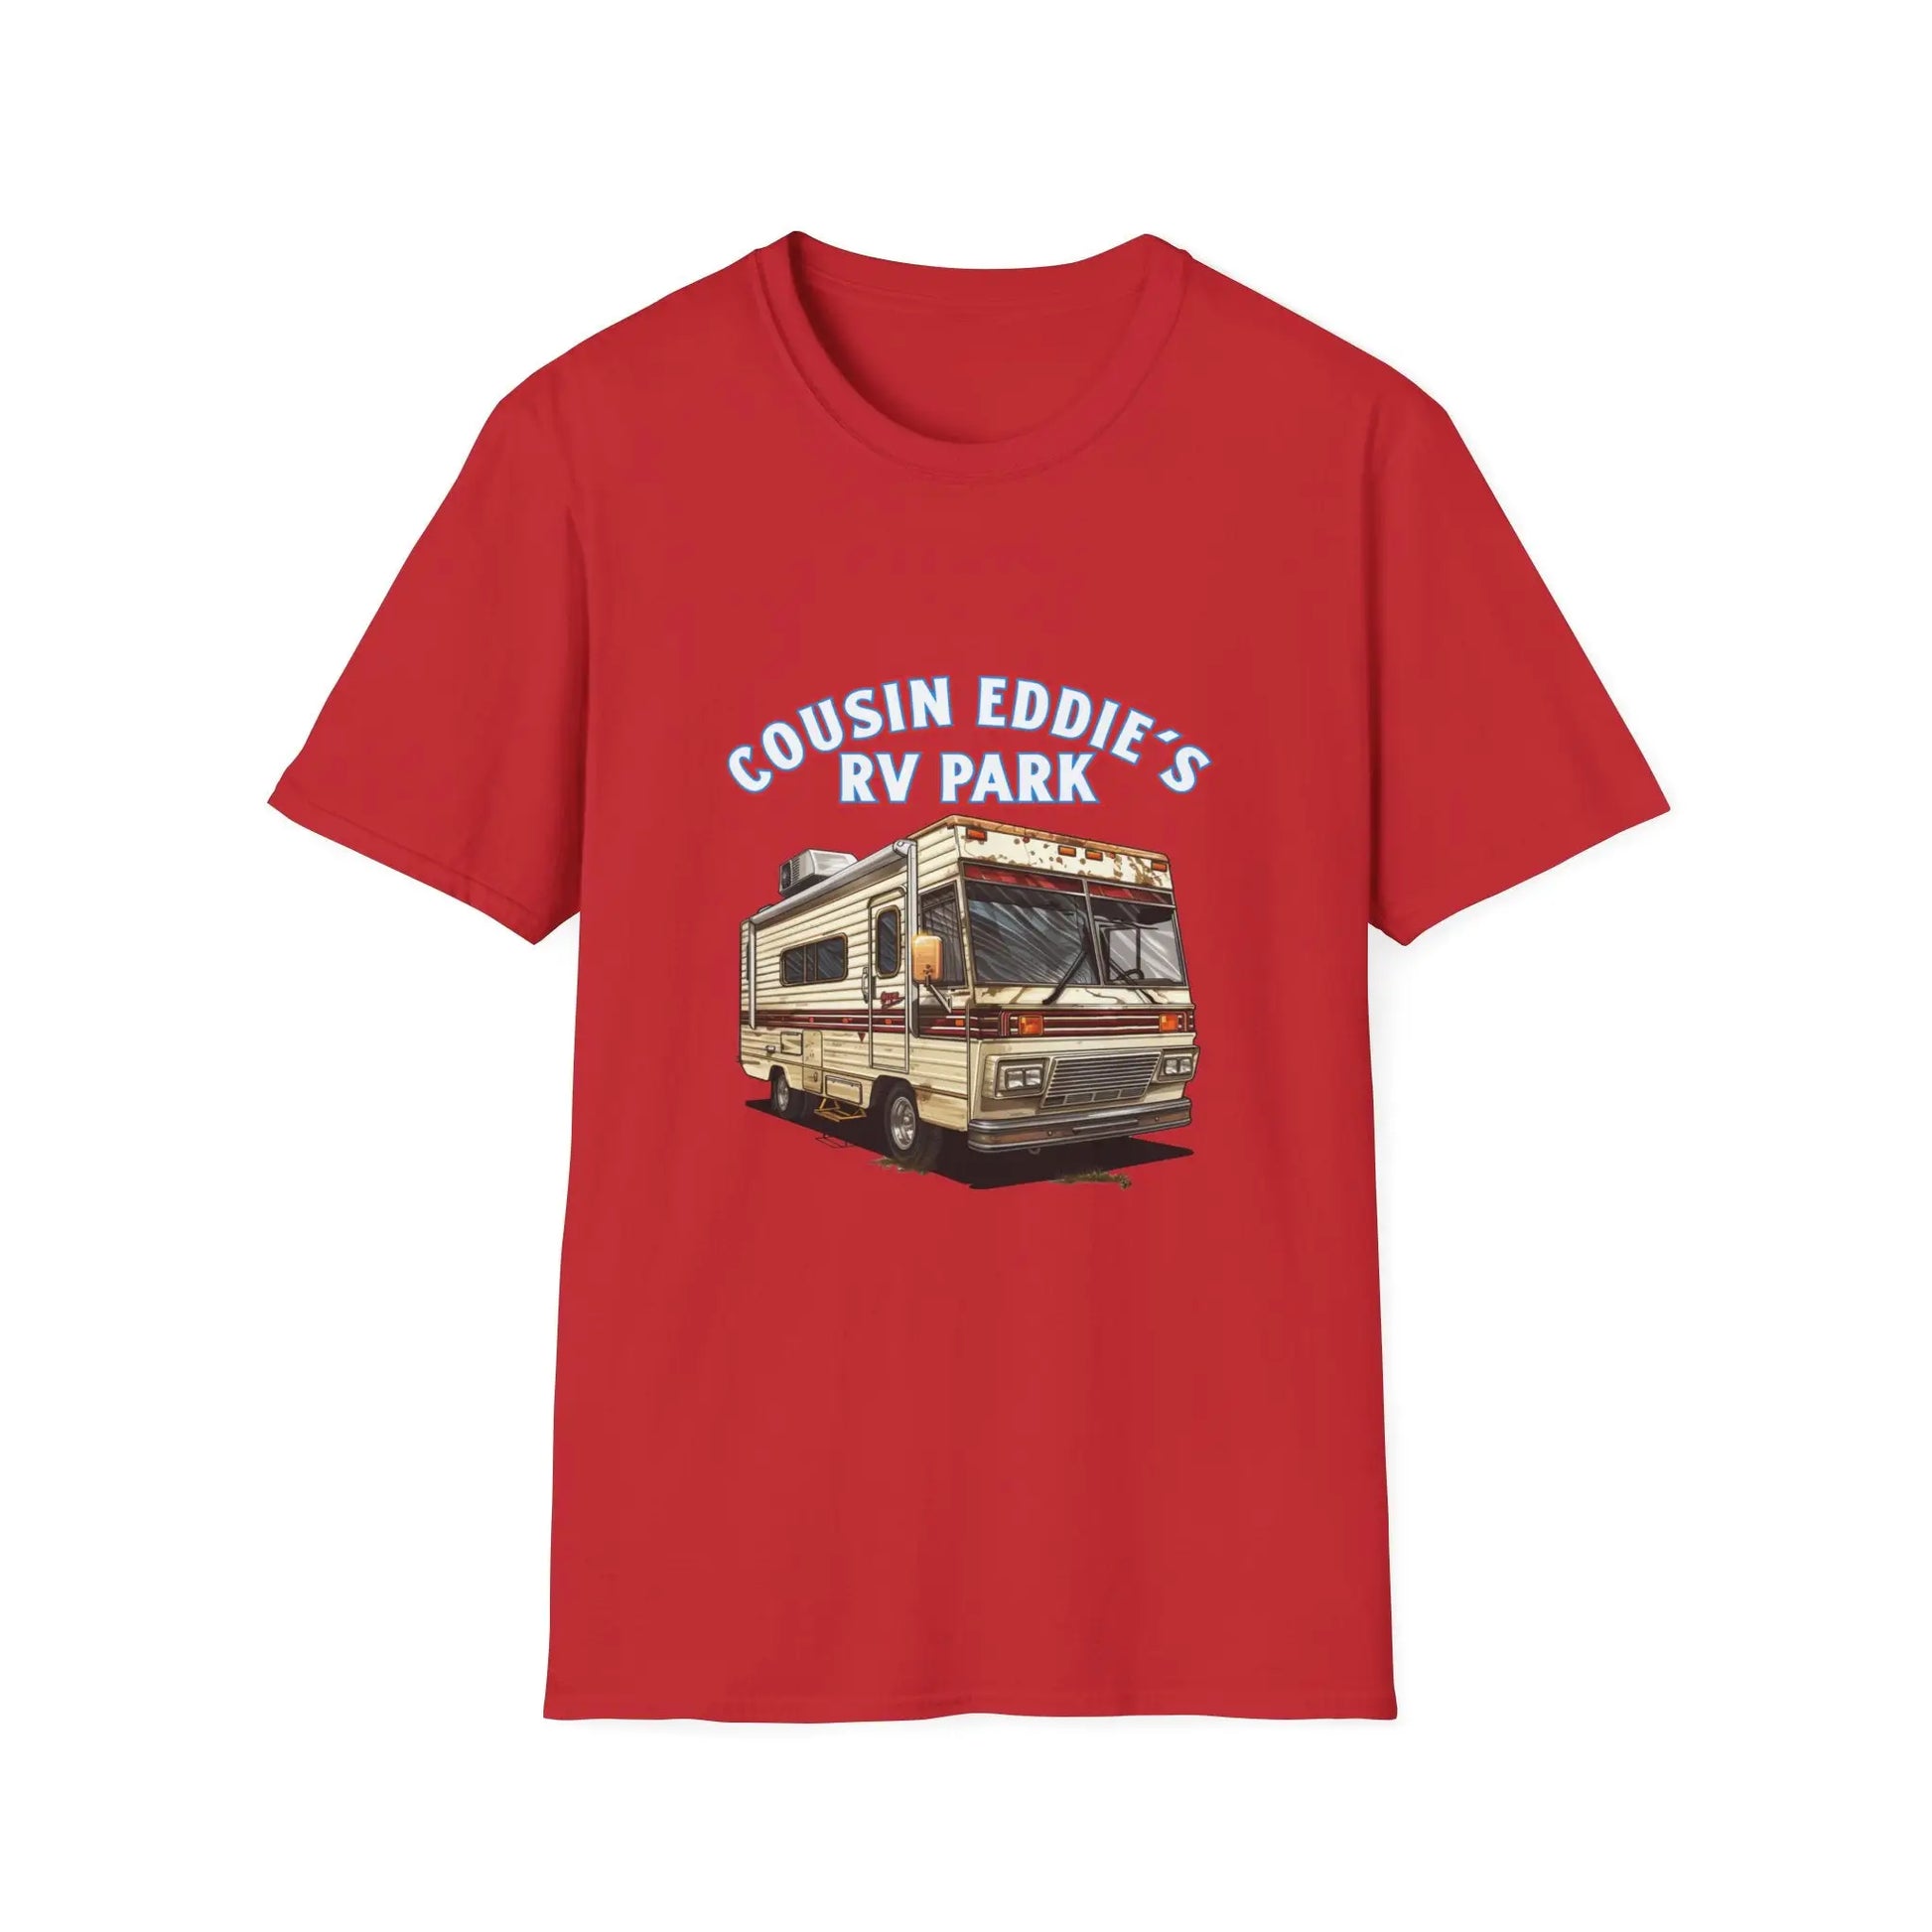 Cousin Eddie's RV Park Women's Softstyle T-Shirt - Wicked Tees